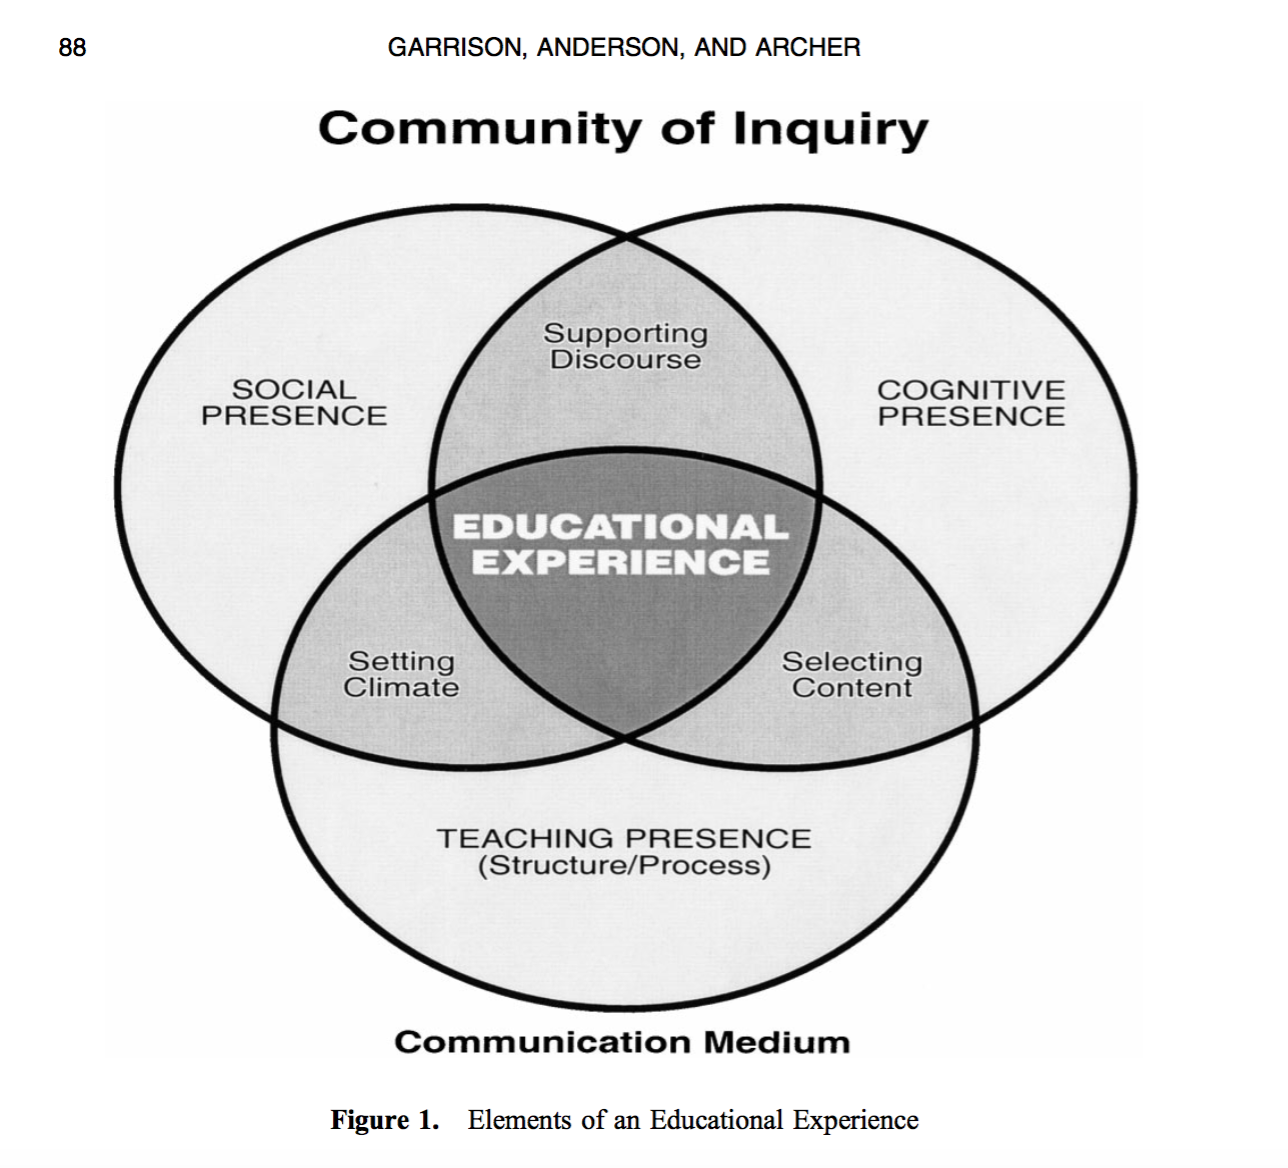 Figure 1 visualizes the Community of Inquiry framework in a venn diagram with three circles labeled 'social presence,' 'cognitive presence,' and 'teaching presence.' The overlap between social presence and cognitive presence includes 'supporting discourse.' The overlap between social presence and teaching presence includes 'setting climate.' The overlap between teaching presence and cognitive presence includes 'selecting content.' In the center of the diagram, where all three presences overlap, is 'educational experience.'